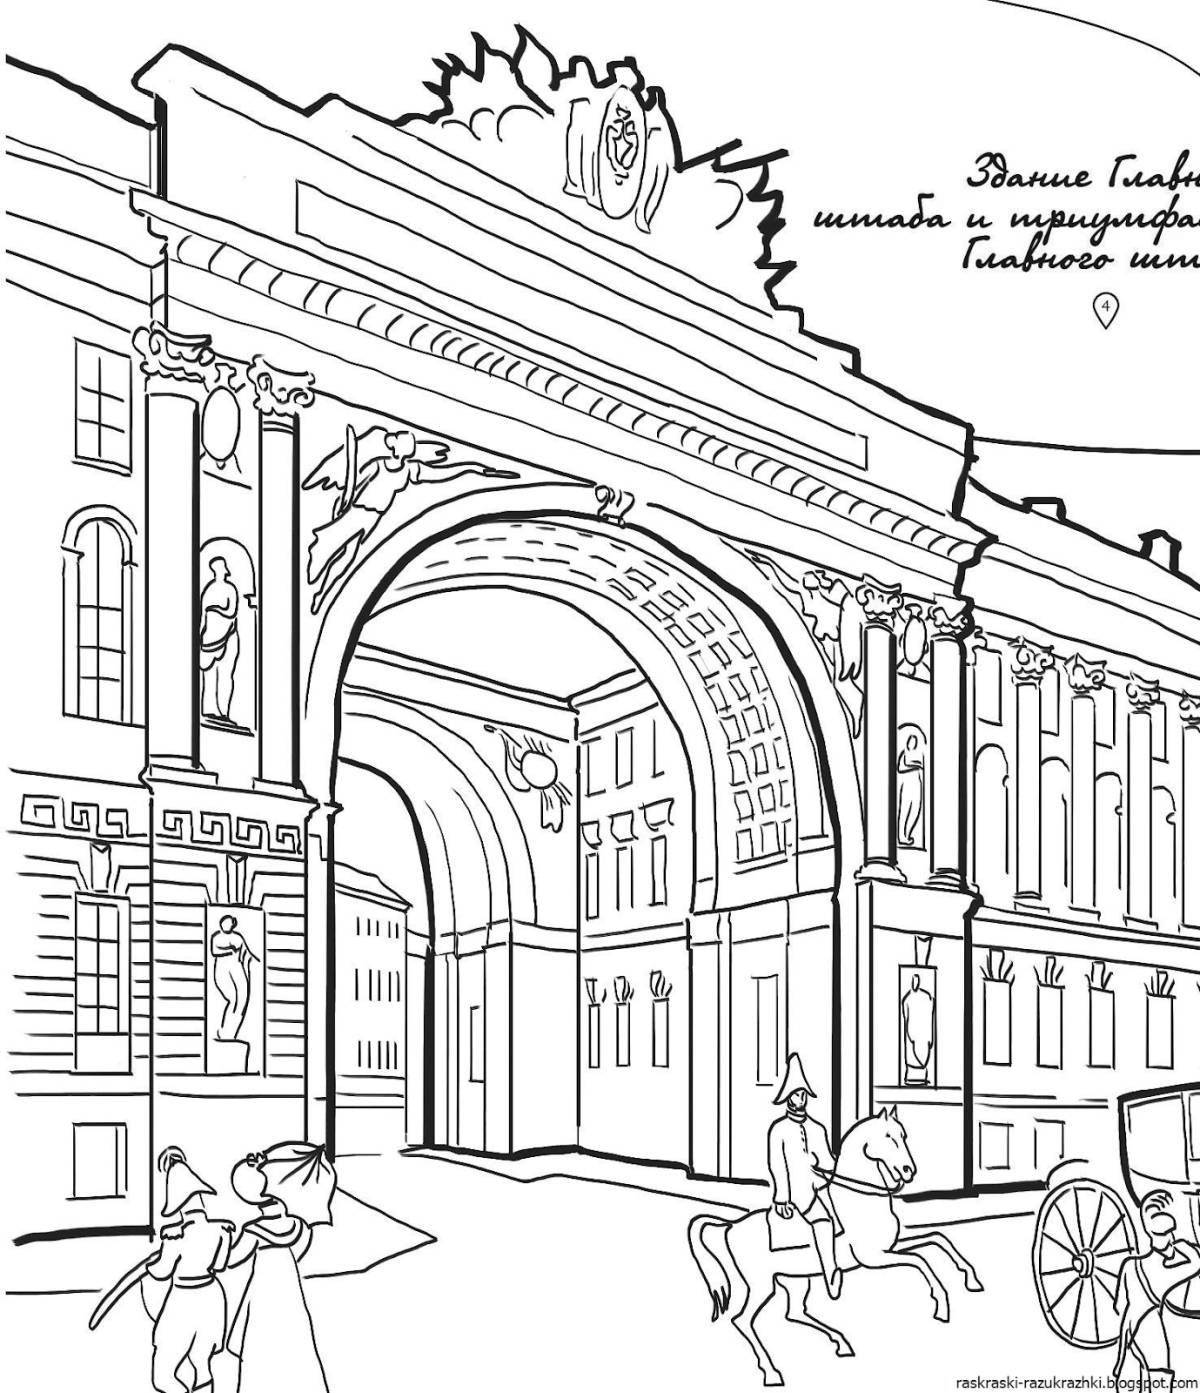 Playful museum coloring page